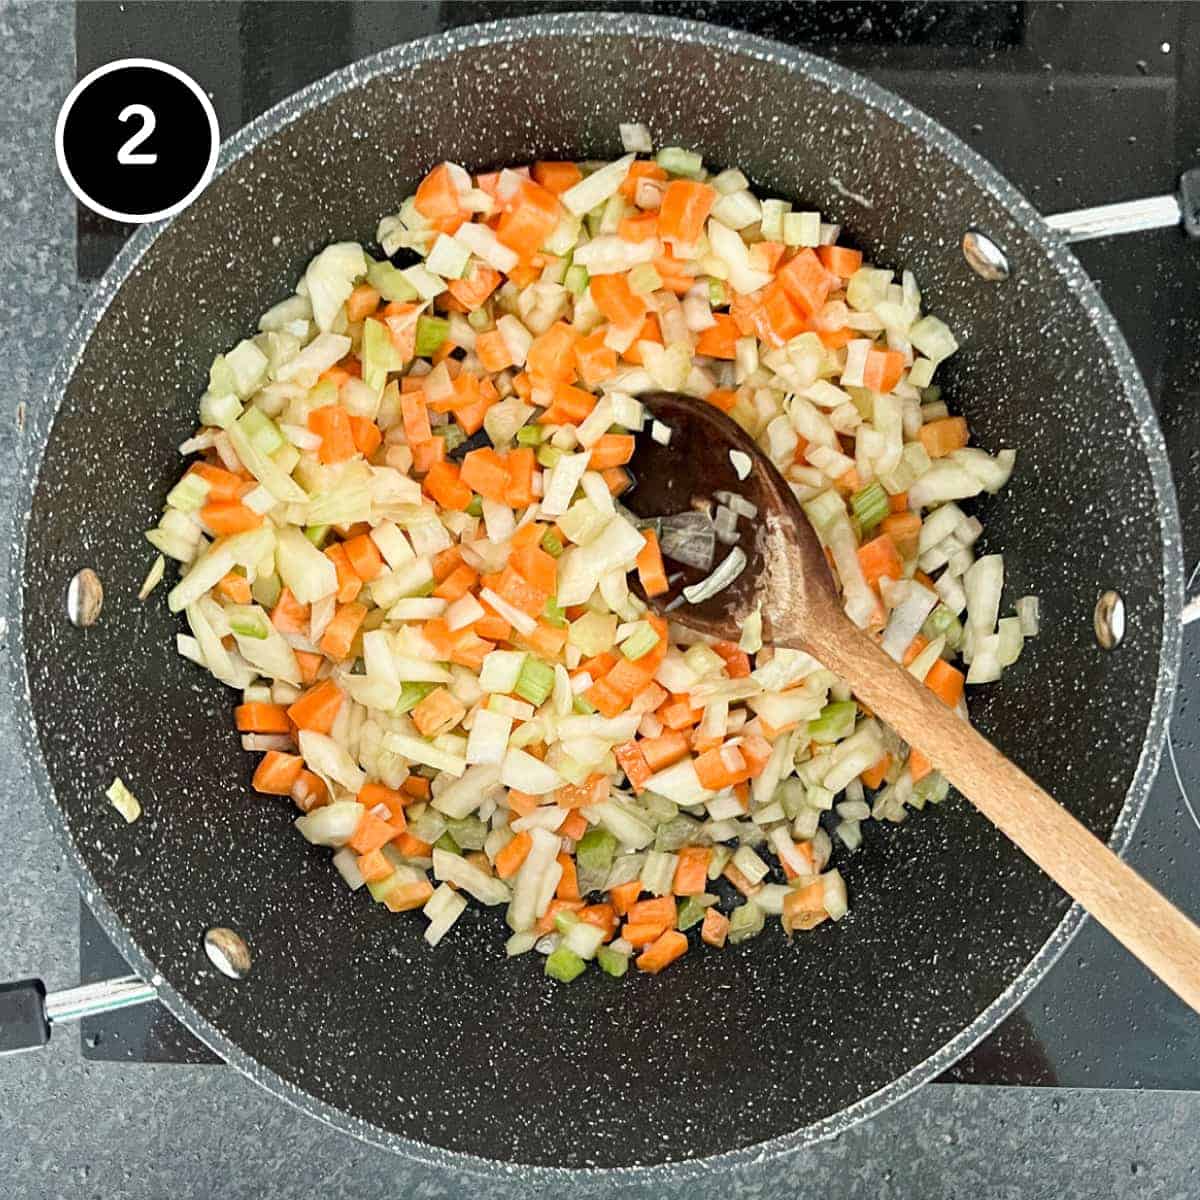 Onion, carrot and celery frying in a pan